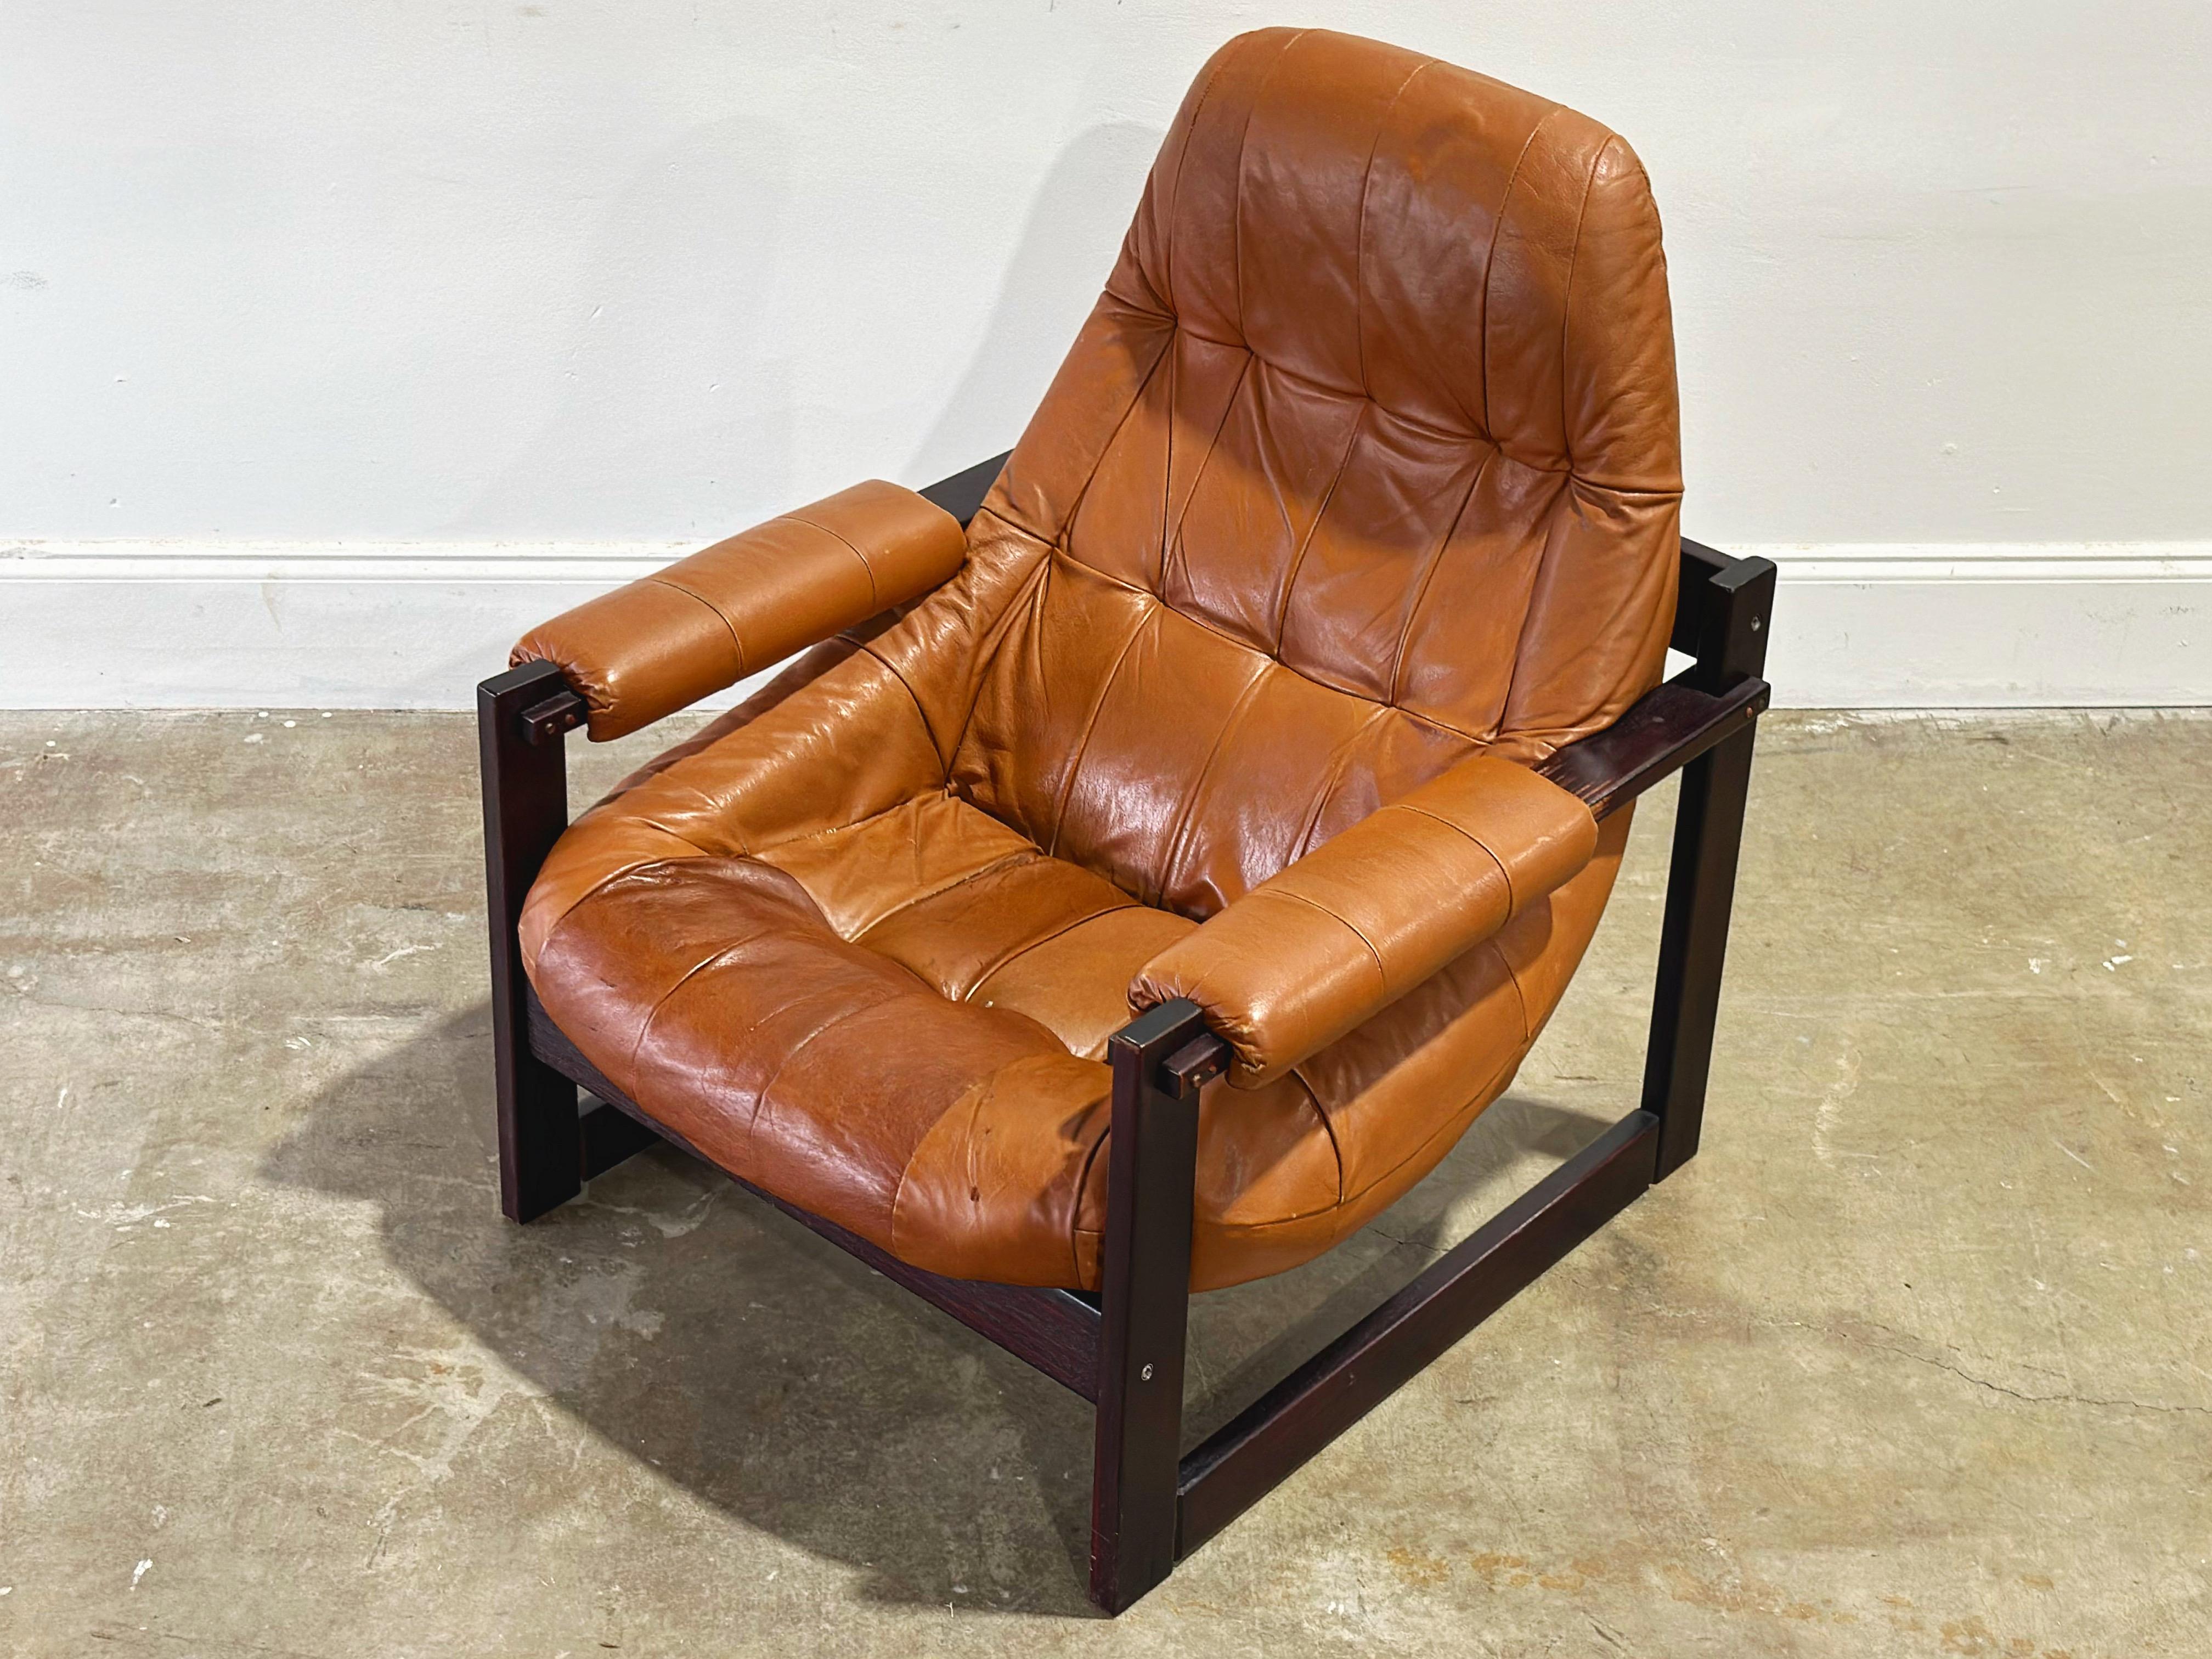 Earth chair with solid Jacaranda rosewood frame and cognac tone leather by Percival Lafer, Brazil circa 1970s. 
Frame is sound and secure. Leather displays a gorgeous patina. This chair does show wear but is in overall good condition. 

